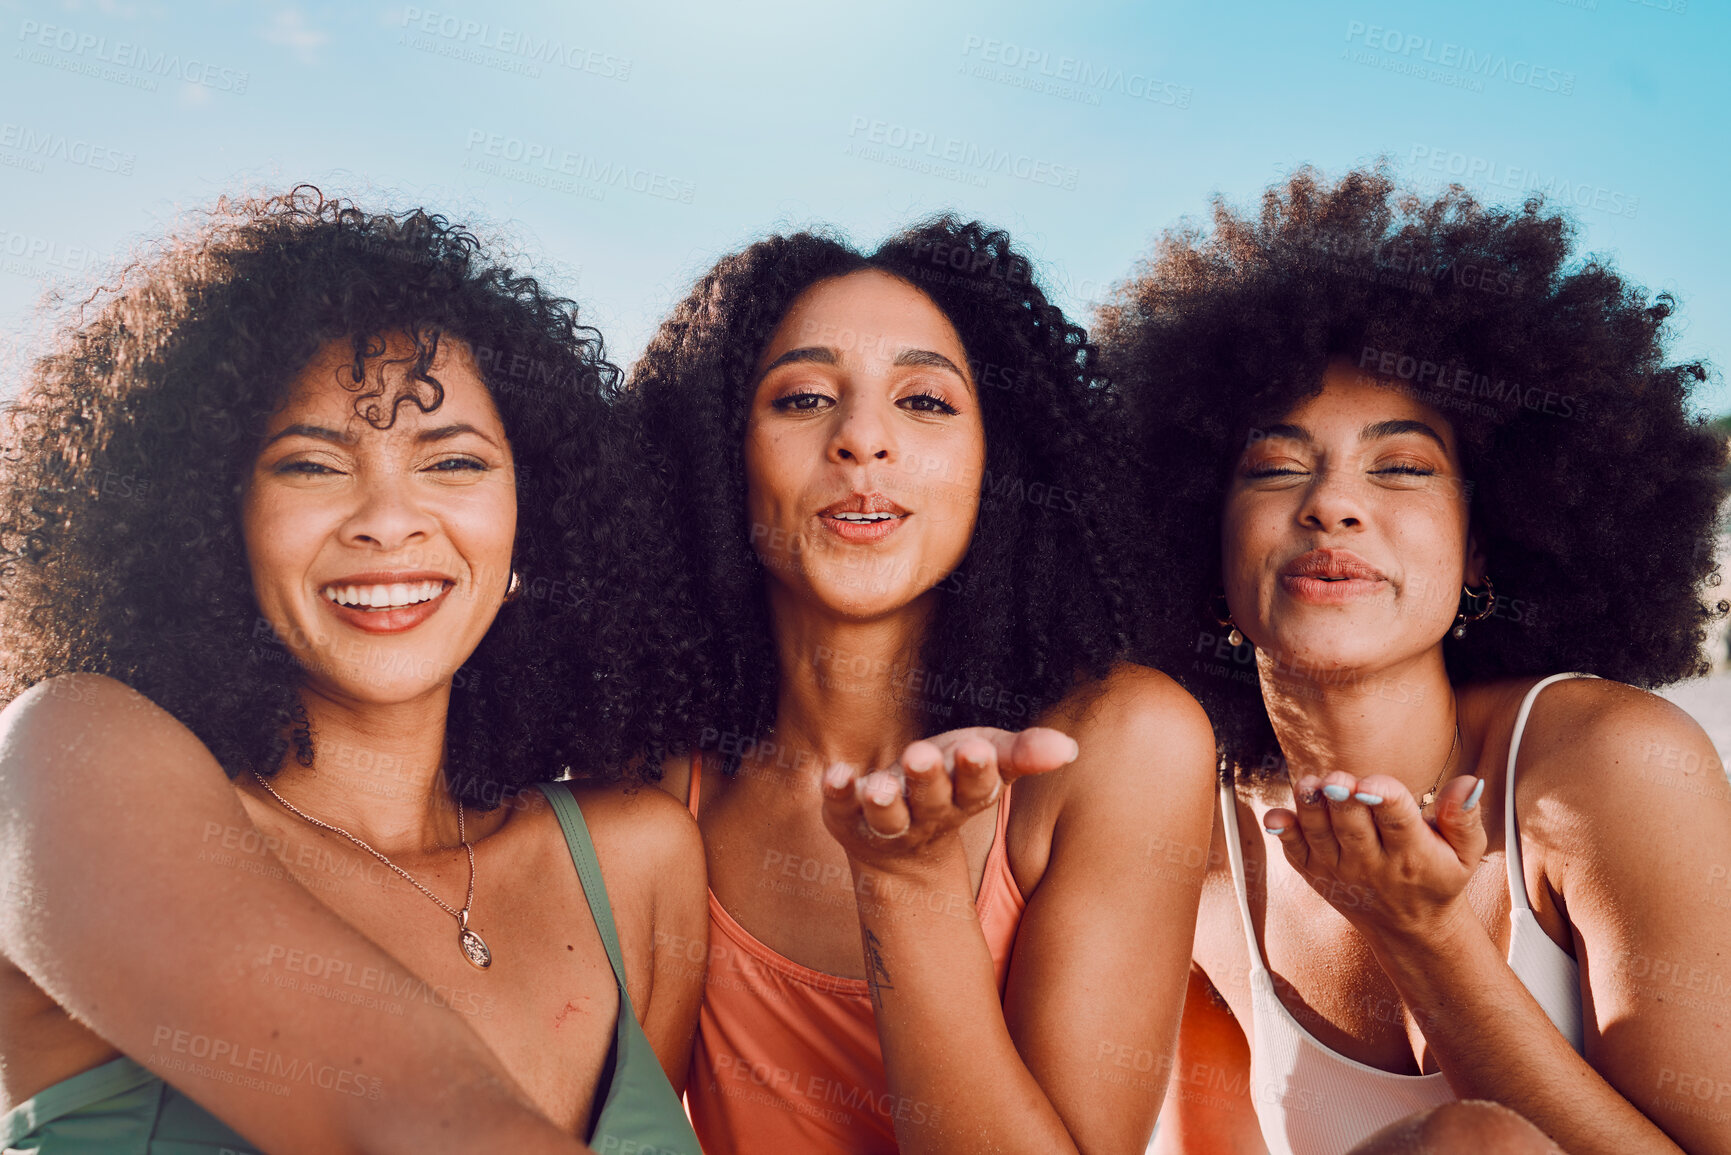 Buy stock photo Black woman, friends and selfie blowing kiss for happy friendship, summer vacation and bonding in the outdoors. Portrait of African American women enjoying social fun for photo moments together